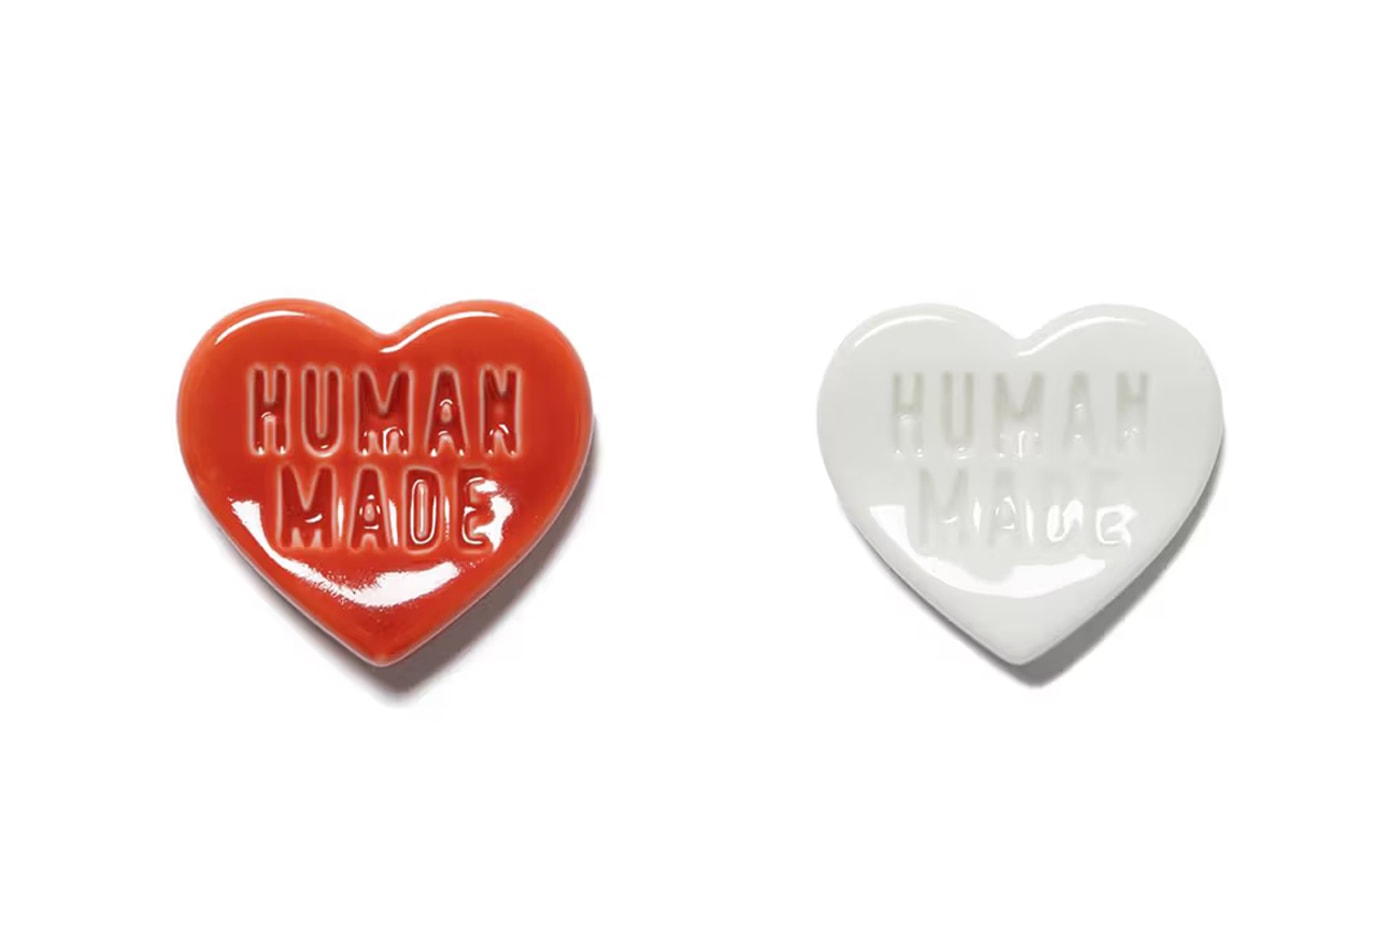 HUMAN MADE Readies for a Lucky New Year good luck  "A・KE・O MADE" capsule release price chopsticks plate link cop store yen dollars usd envelope paper heart logo nigo